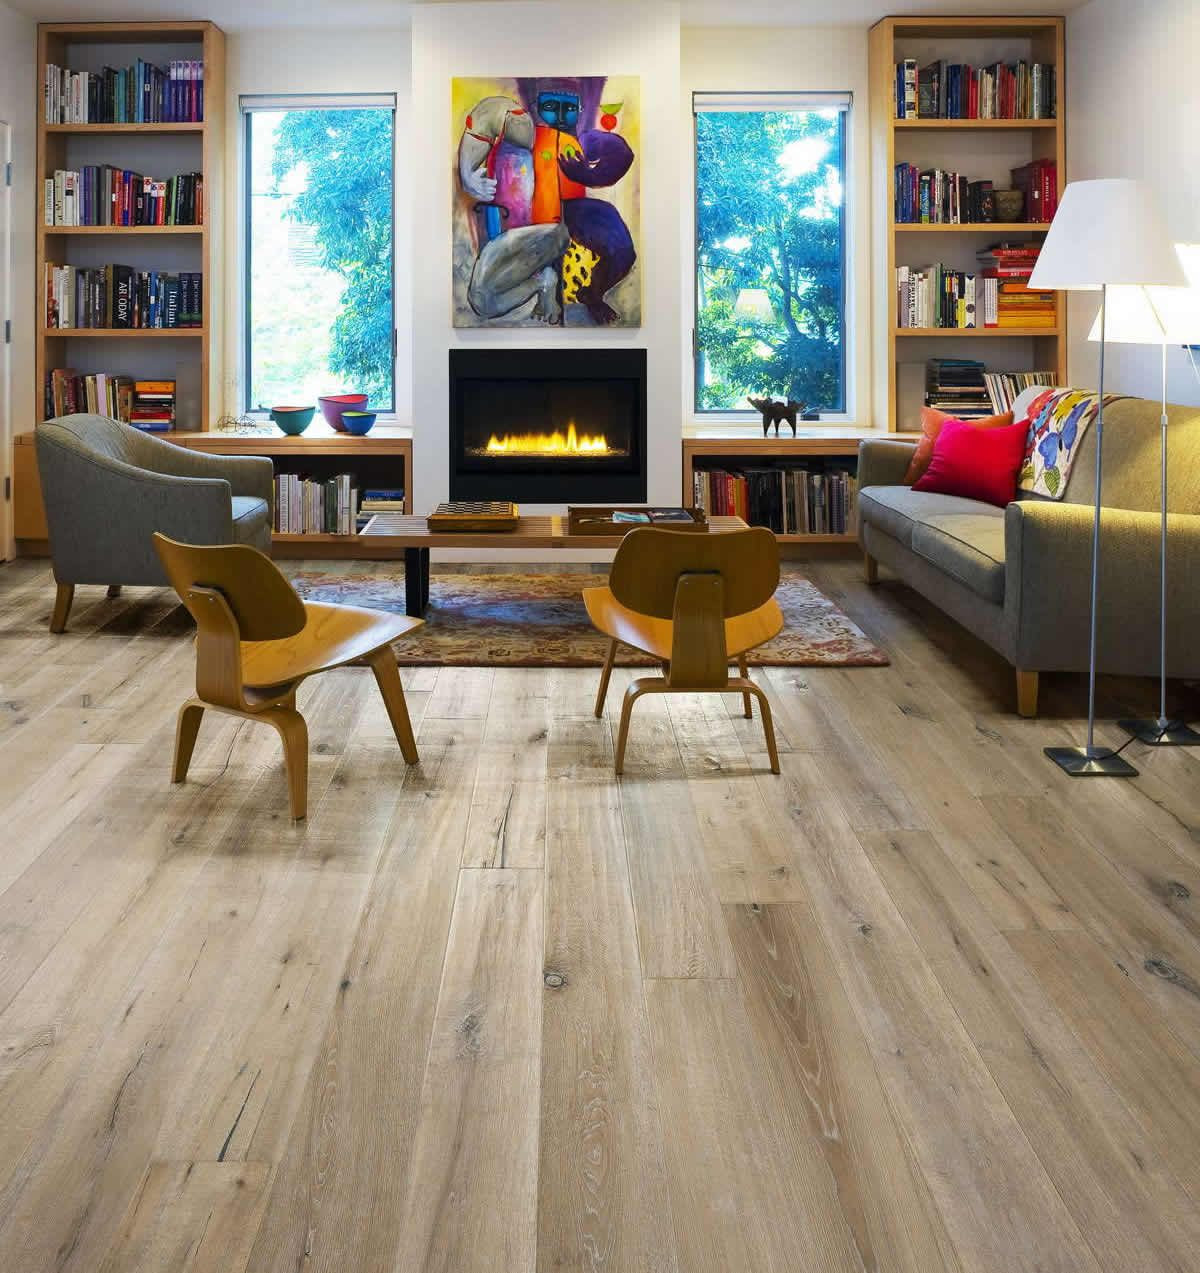 11 Famous Hardwood Flooring Trends for 2017 2022 free download hardwood flooring trends for 2017 of kahrs artisan oak linen engineered wood flooring pinterest throughout bring light and life into your home with the beautiful kahrs artisan oak linen engi